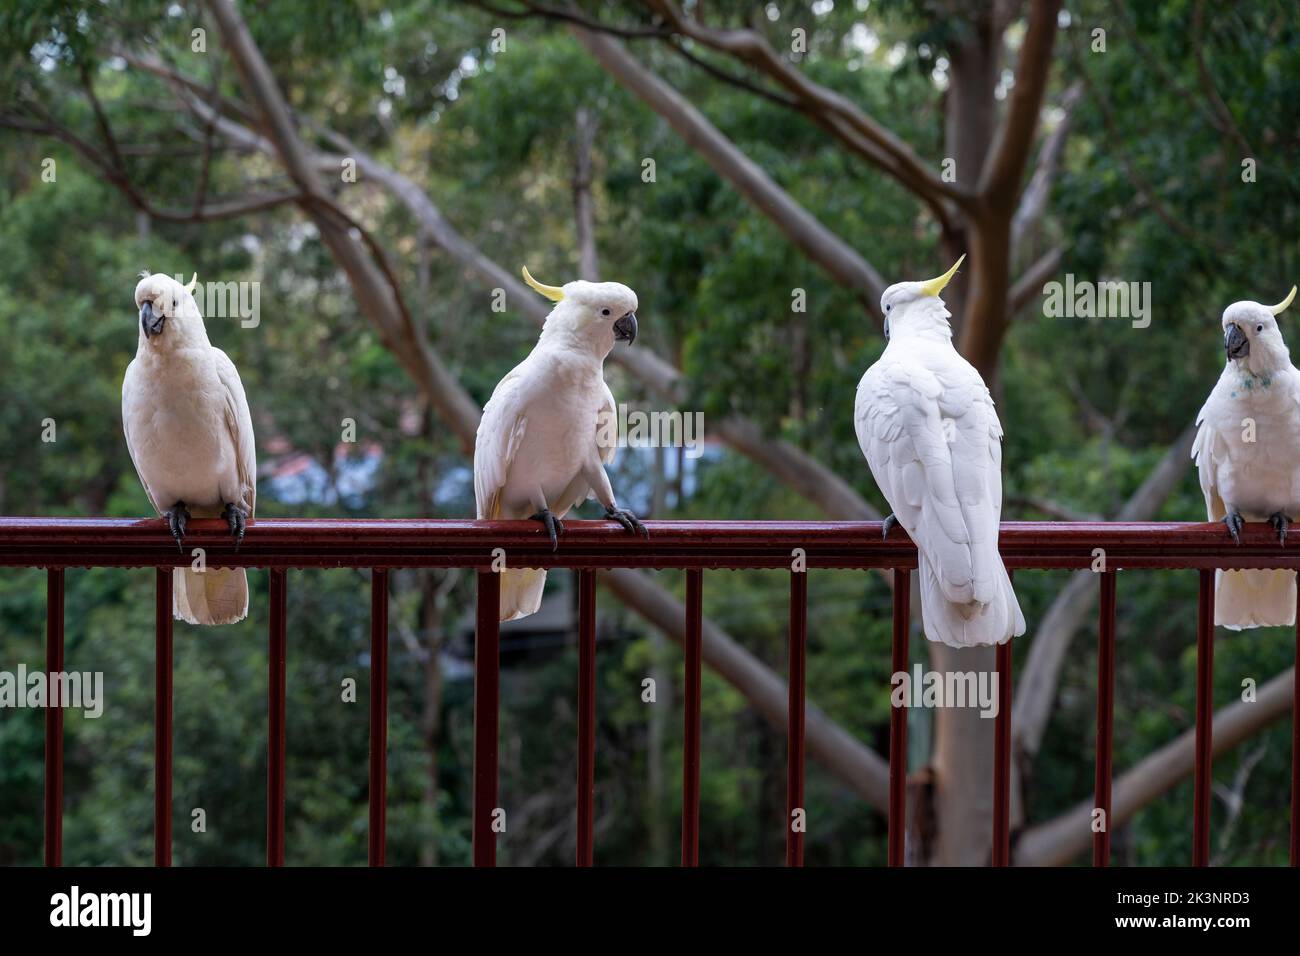 Birds perched on railings in balcony of building. Concept of birds and humans cohabitating. Birds surviving in human urban areas in Australia. Stock Photo